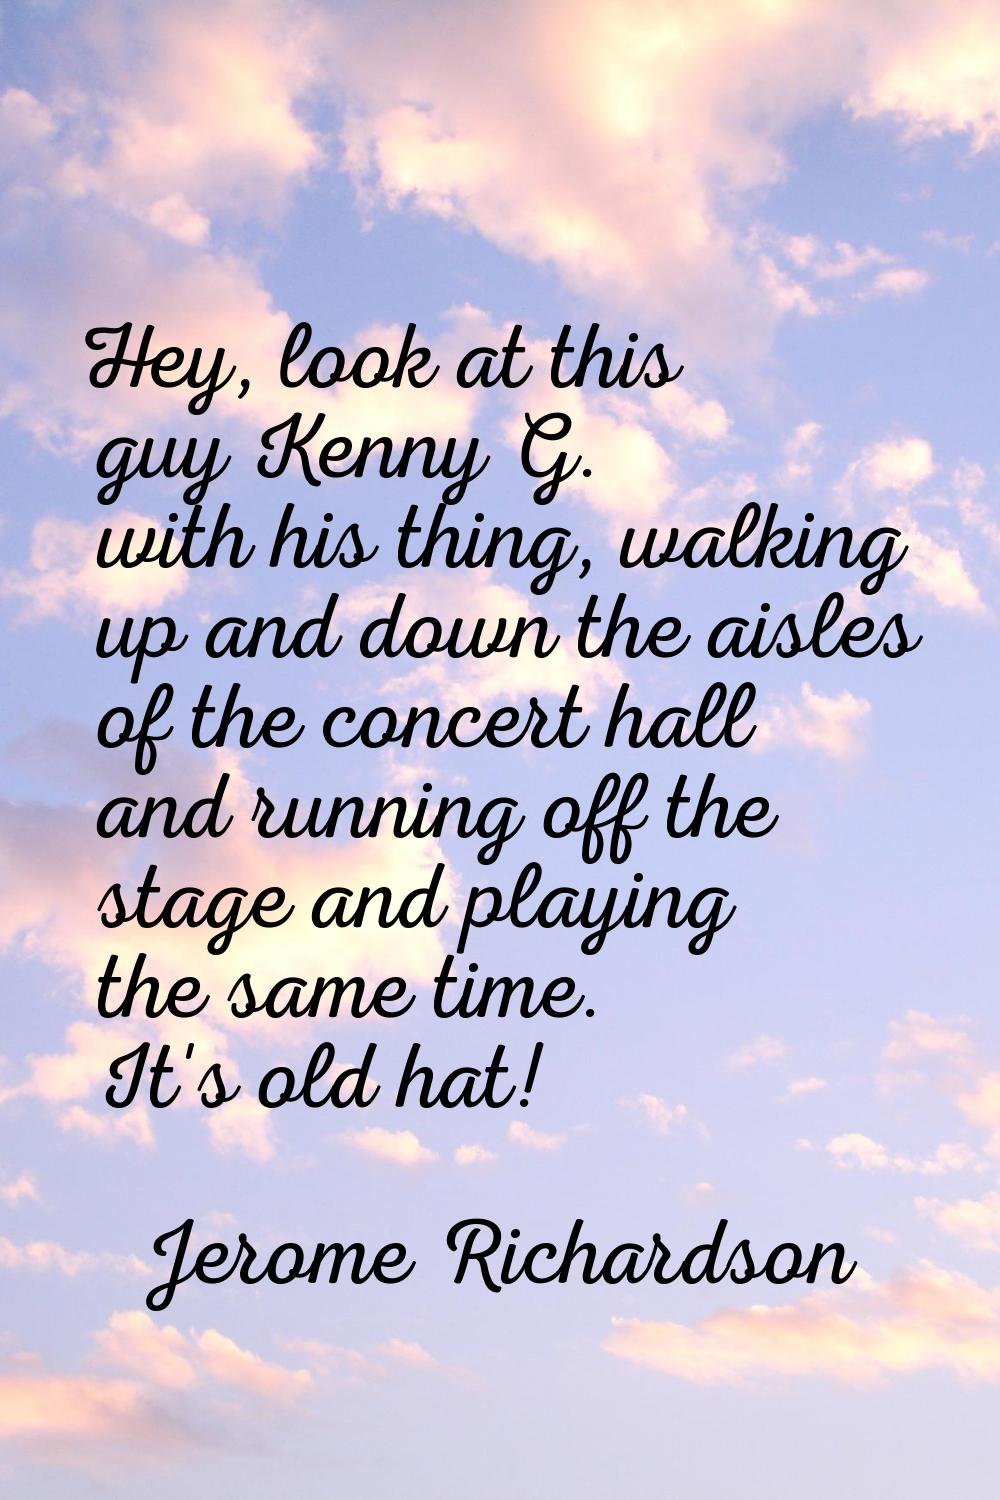 Hey, look at this guy Kenny G. with his thing, walking up and down the aisles of the concert hall a